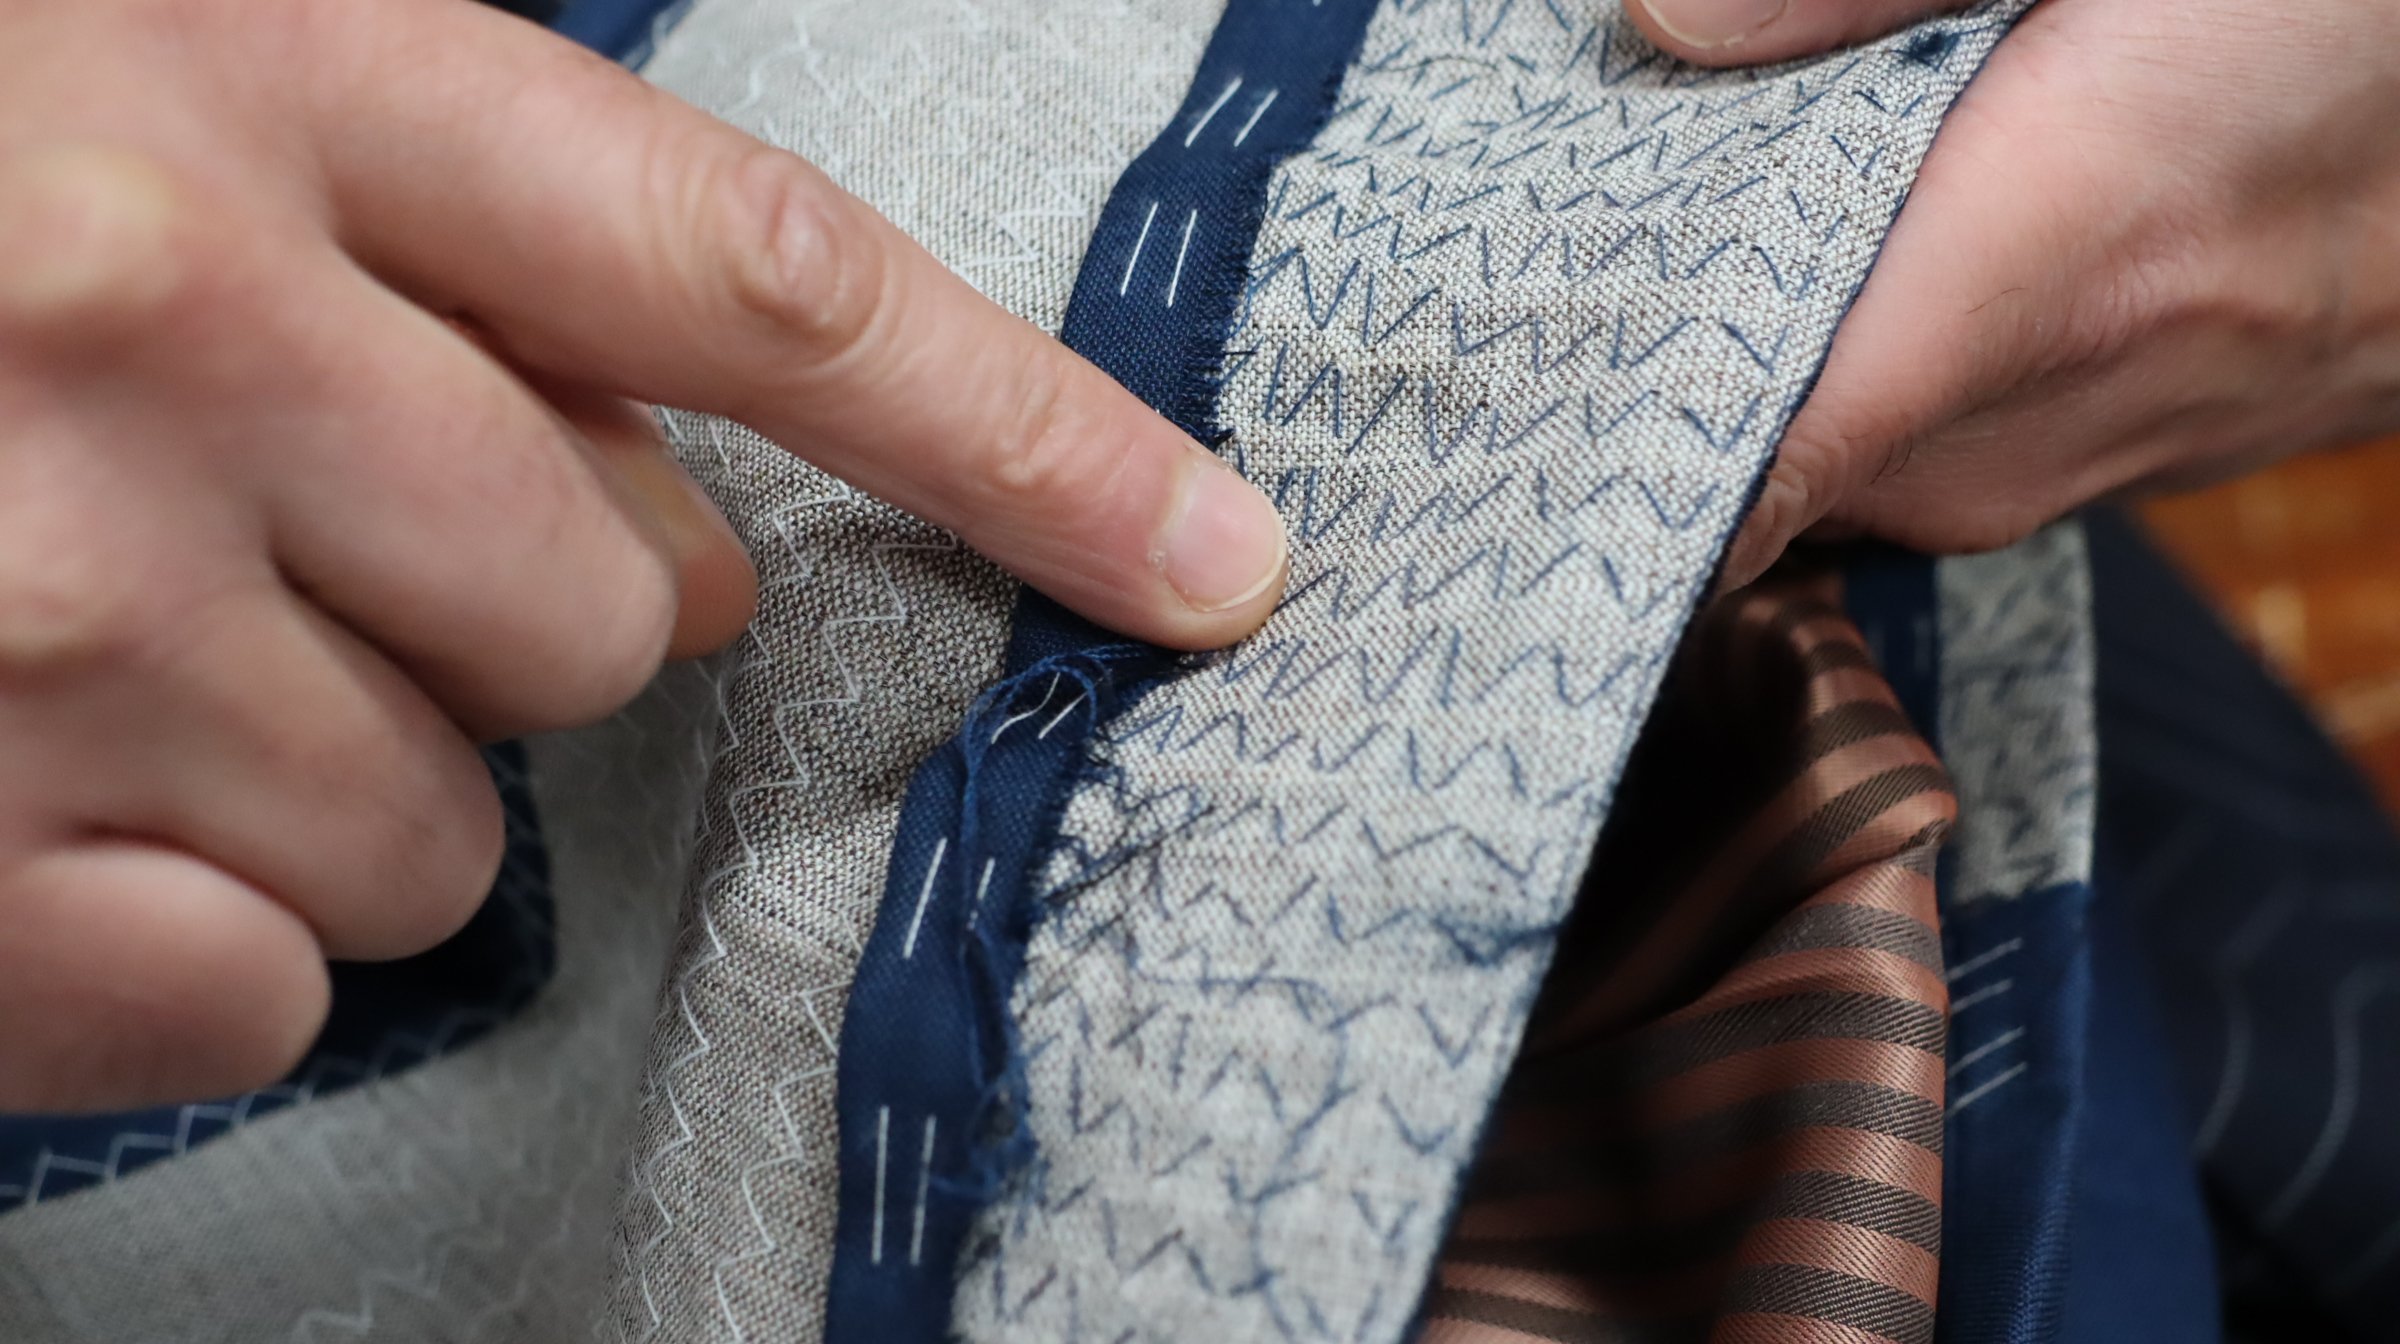 Irregular stitching is the sign of manual work.